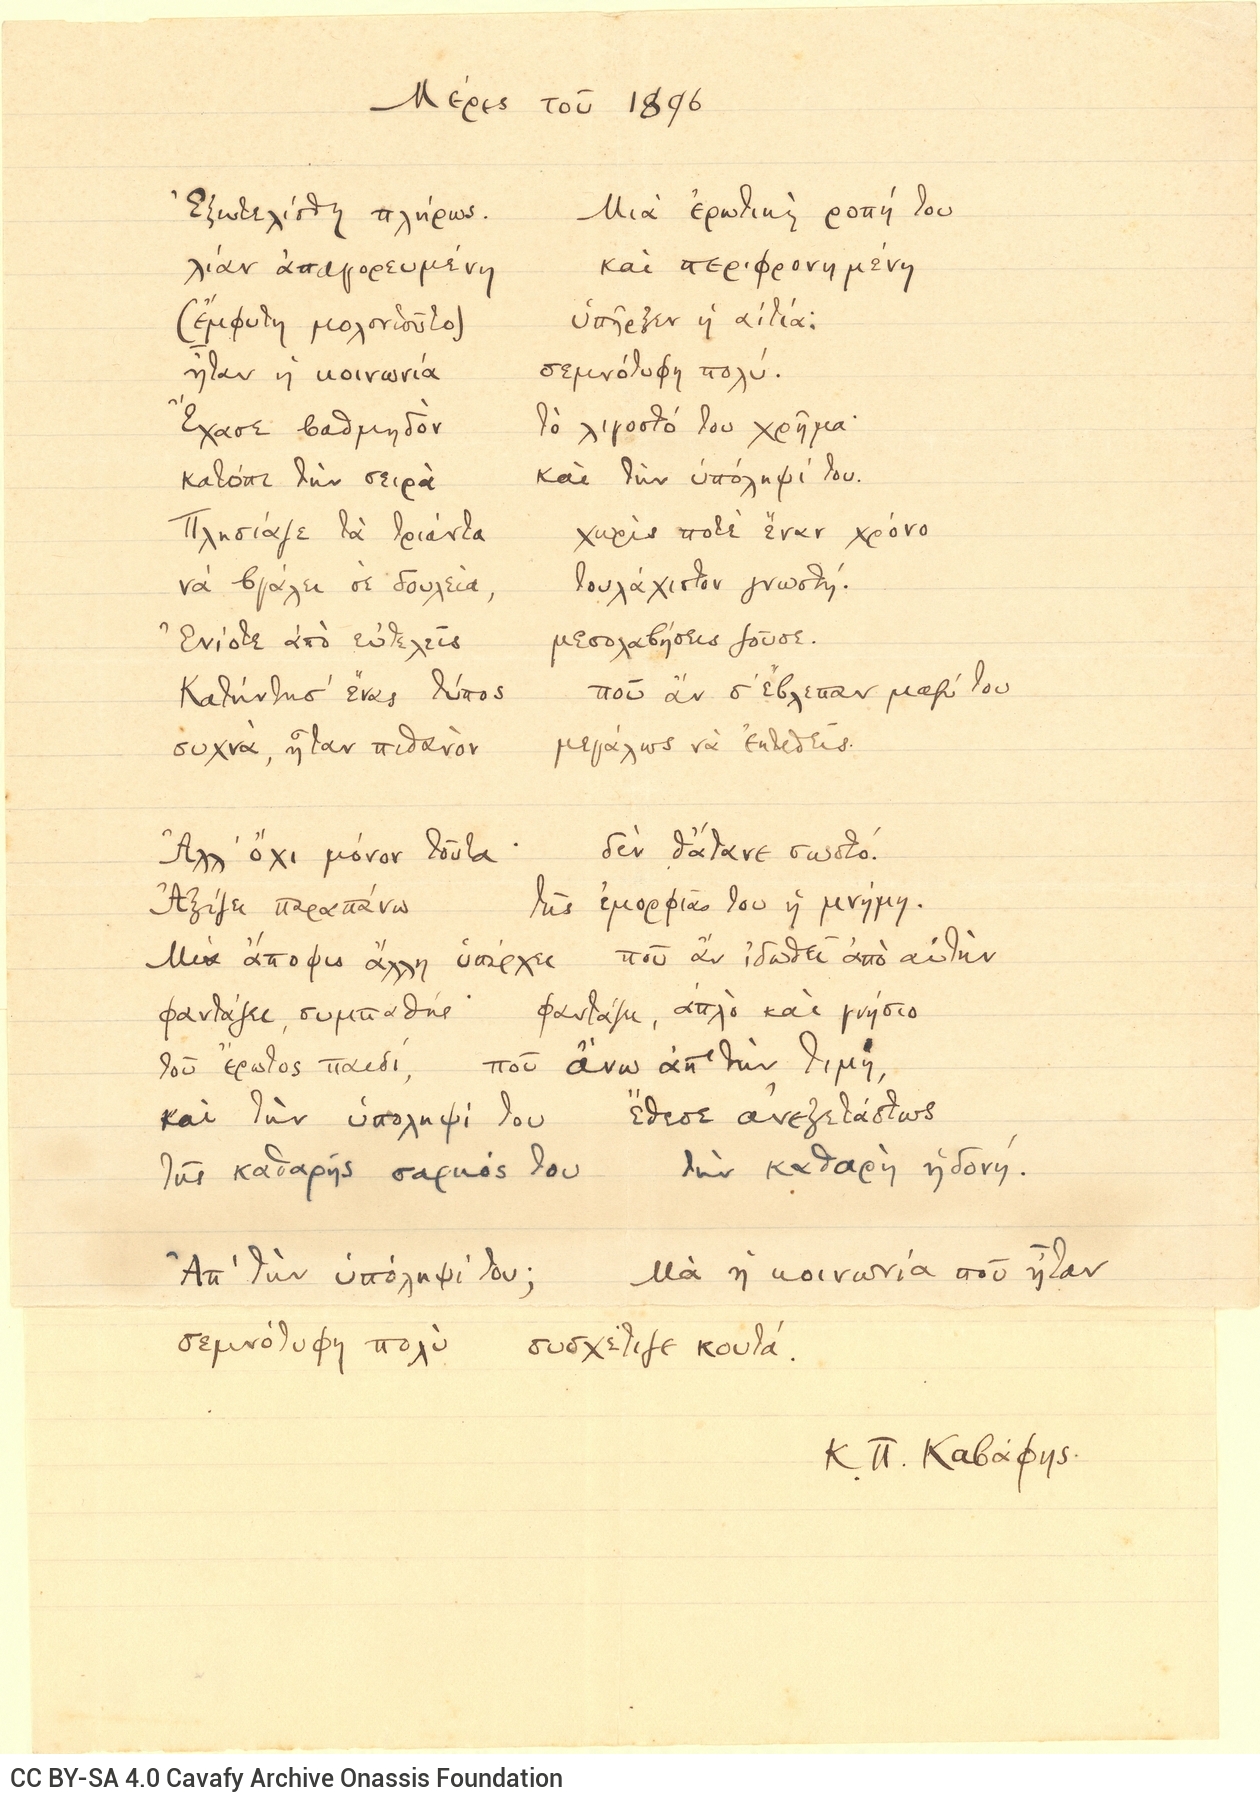 Autograph manuscript of the poem "Days of 1896" on one side of a ruled sheet with affixed addition.